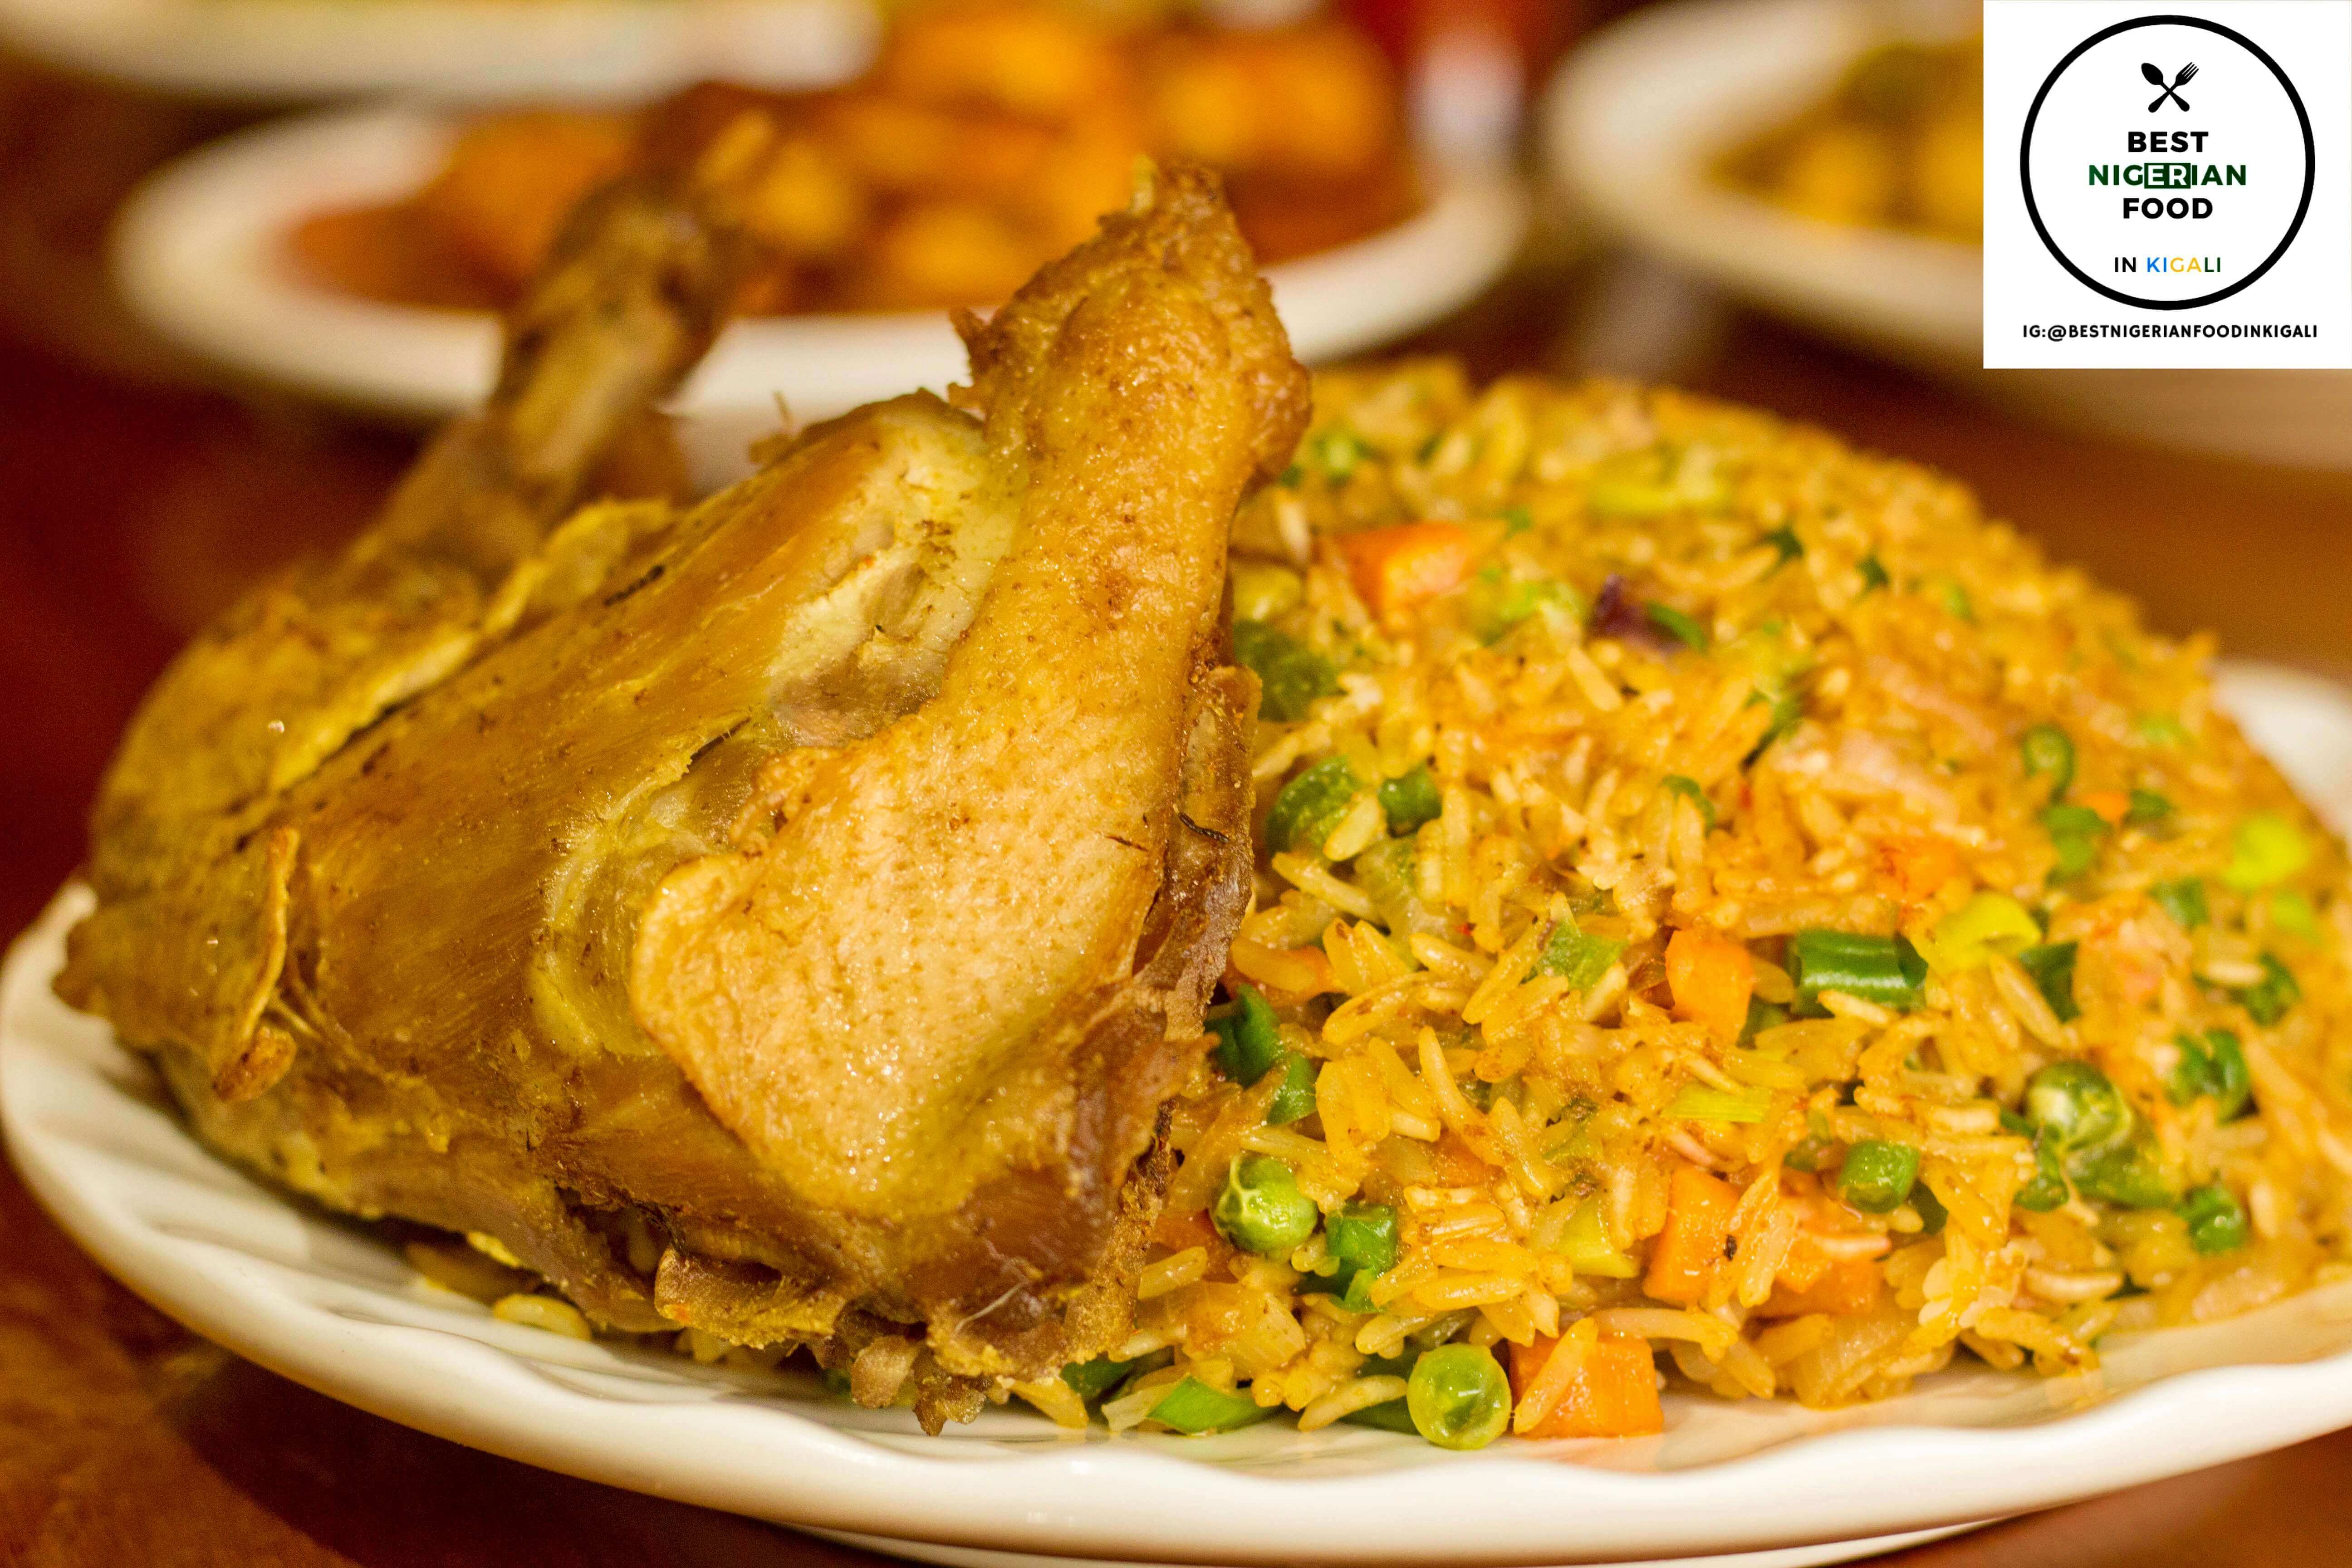 Smokey Party Jollof Rice in Litres - The Best Nigerian Food in Kigali